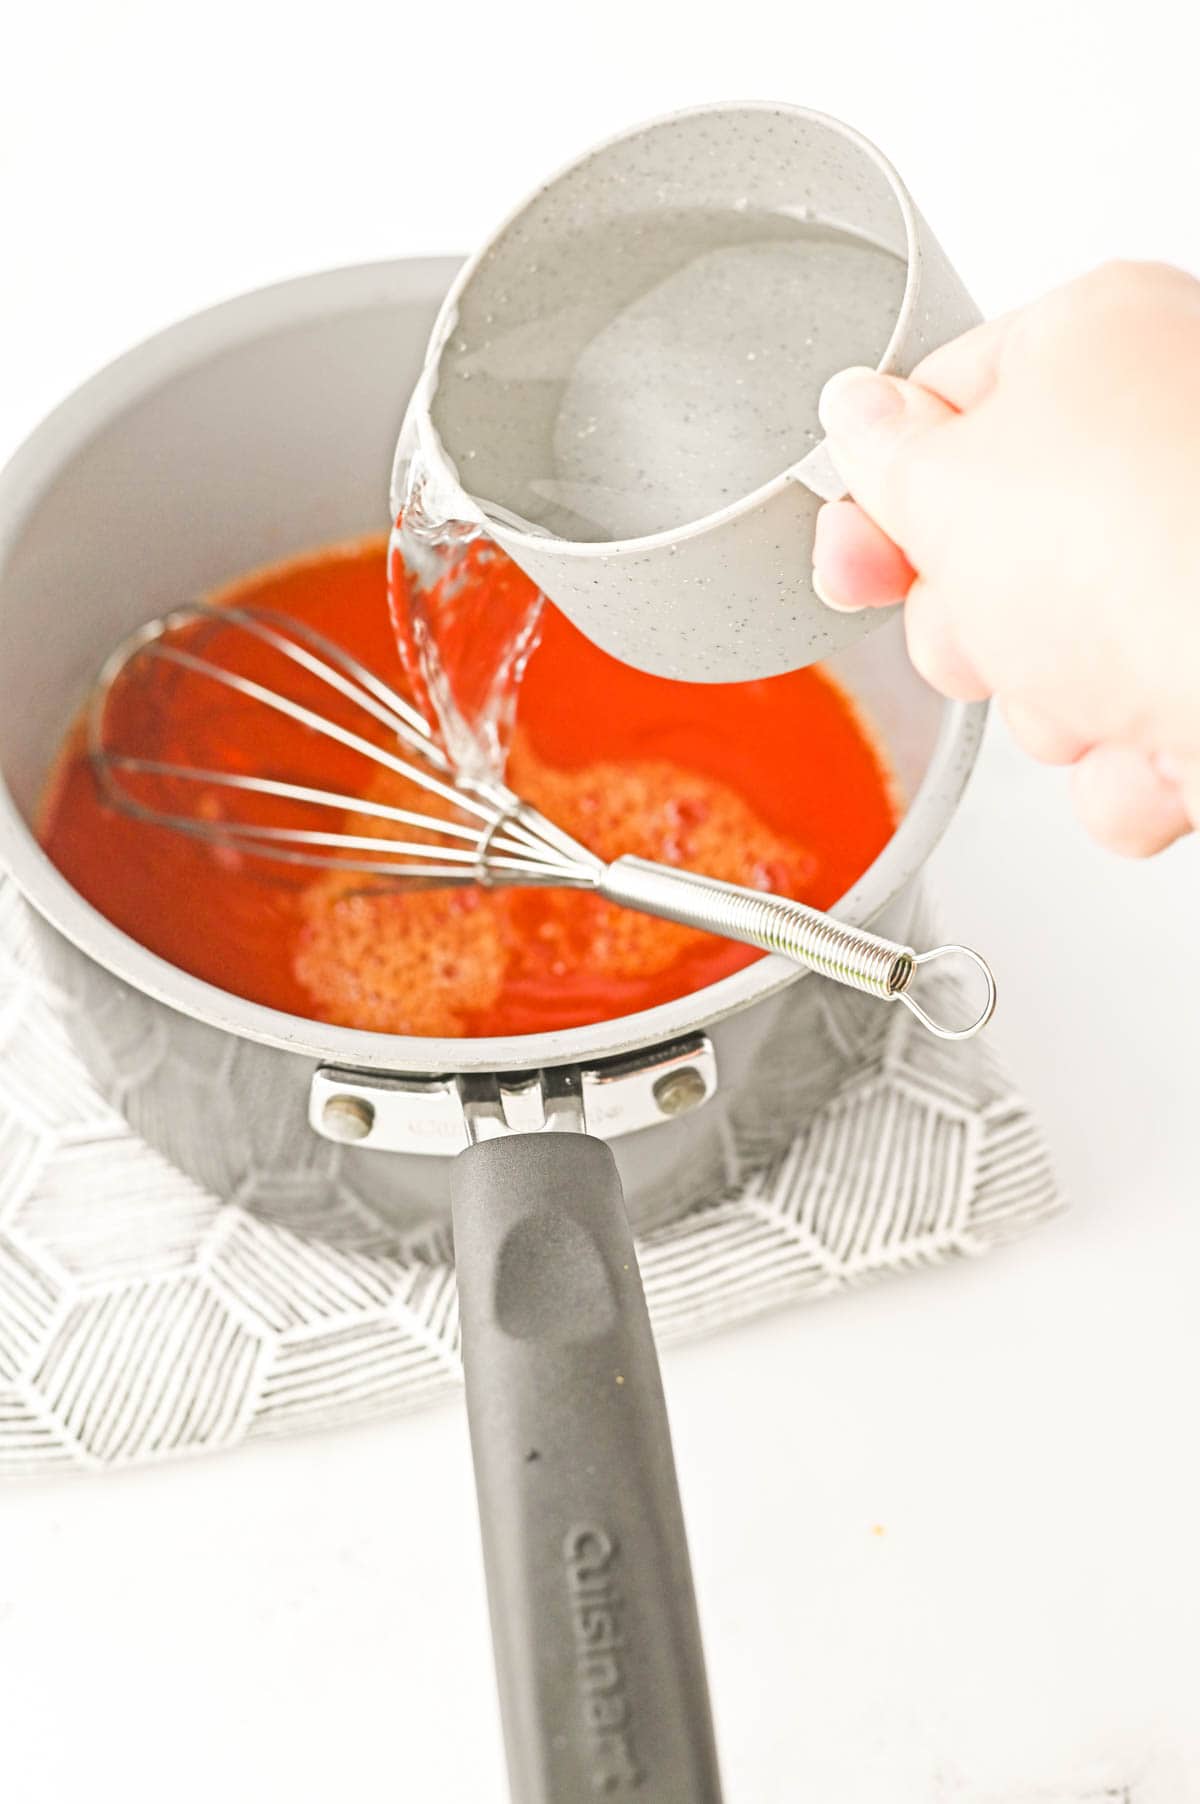 Cold water being poured into a pan of orange Jello.